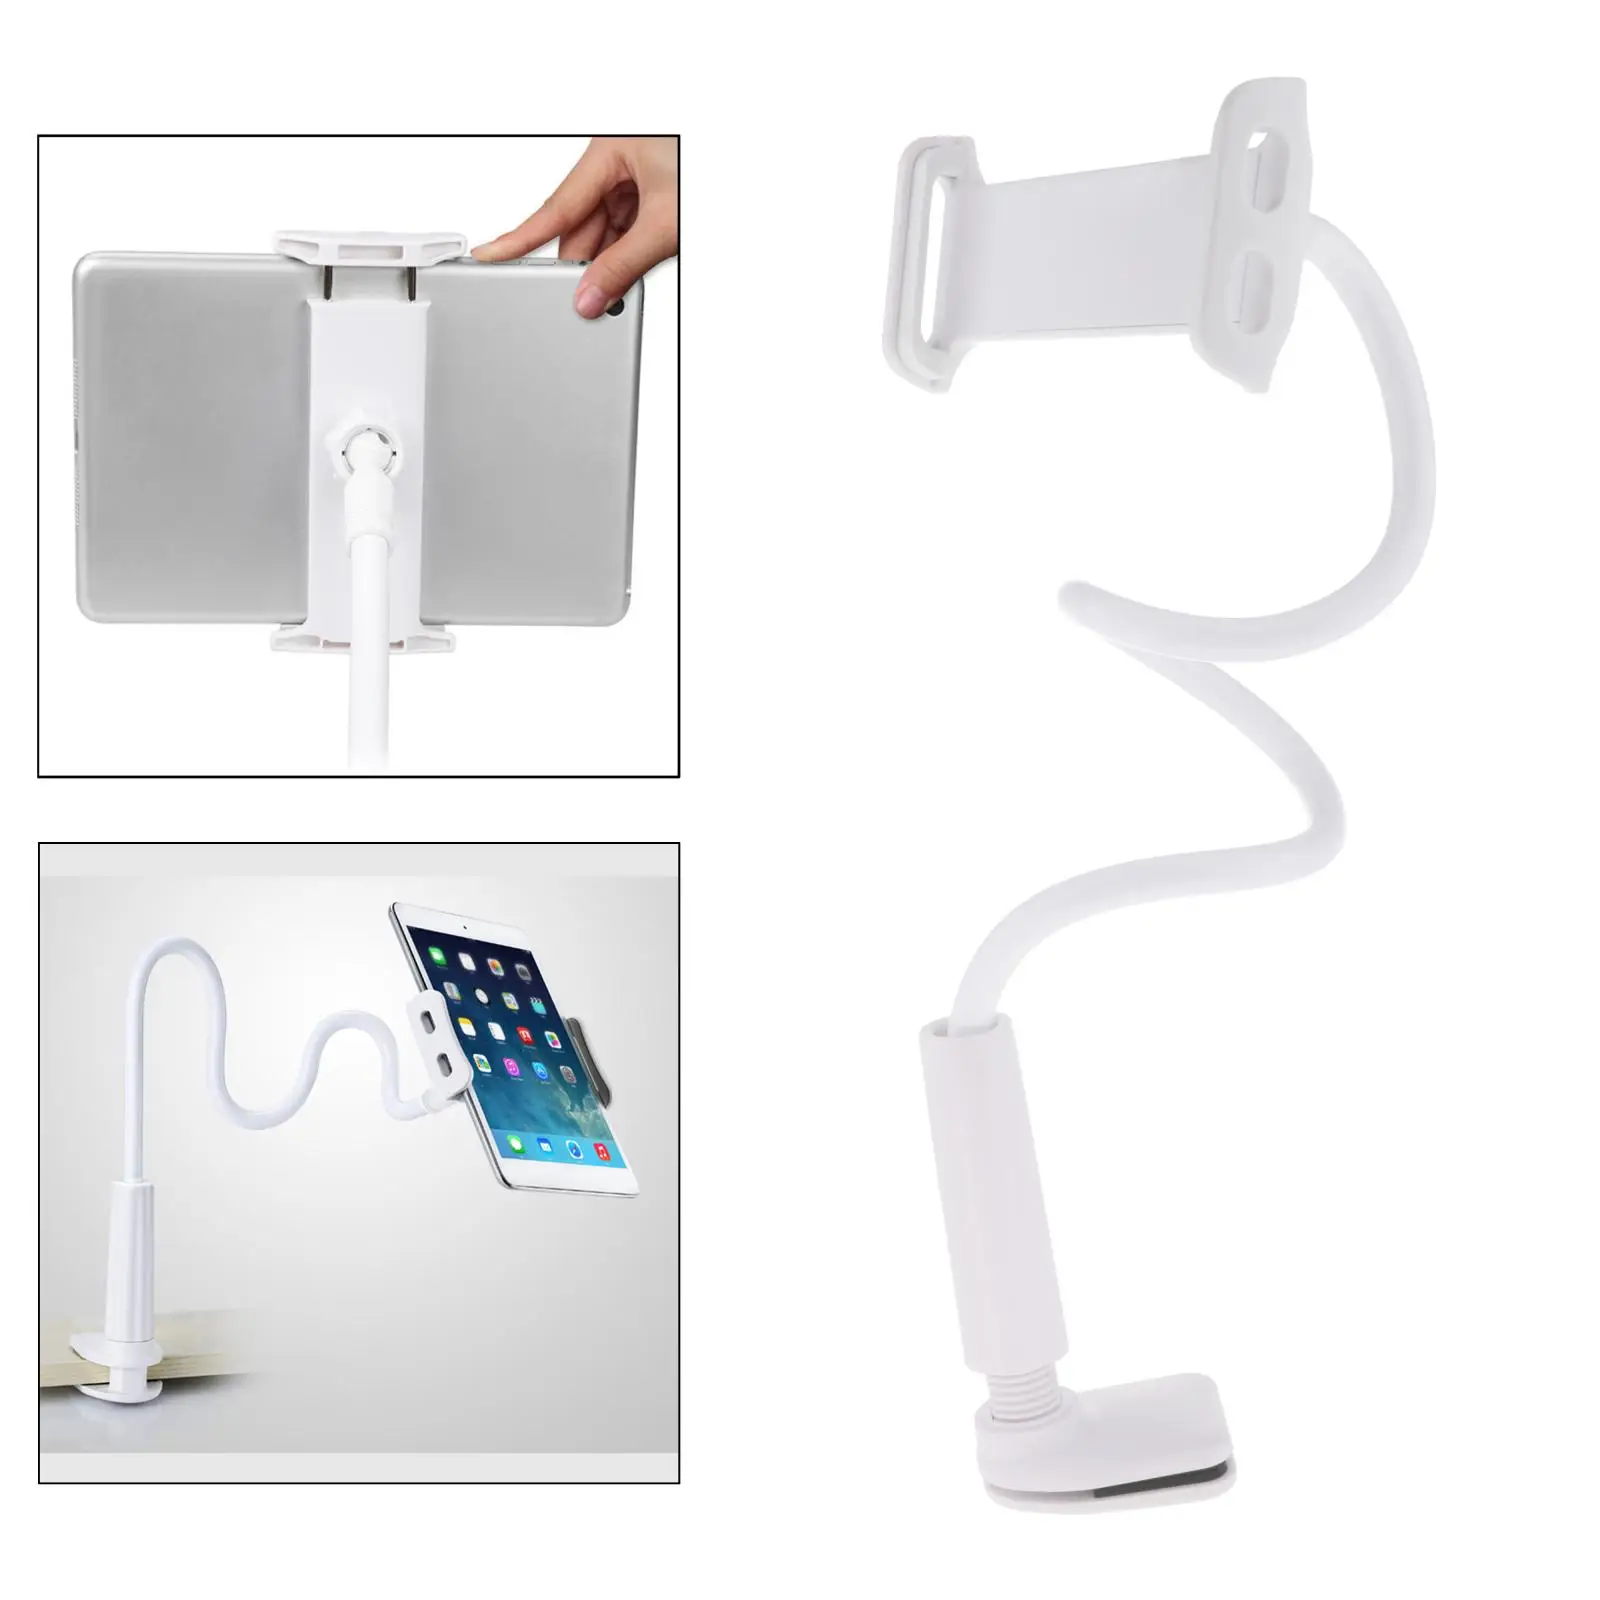 Mobile Phone Holder Long Arms 360 Rotating Flexible Desktop Bed Lazy Bracket Mobile Stand Support For iPhone iPad Samsung